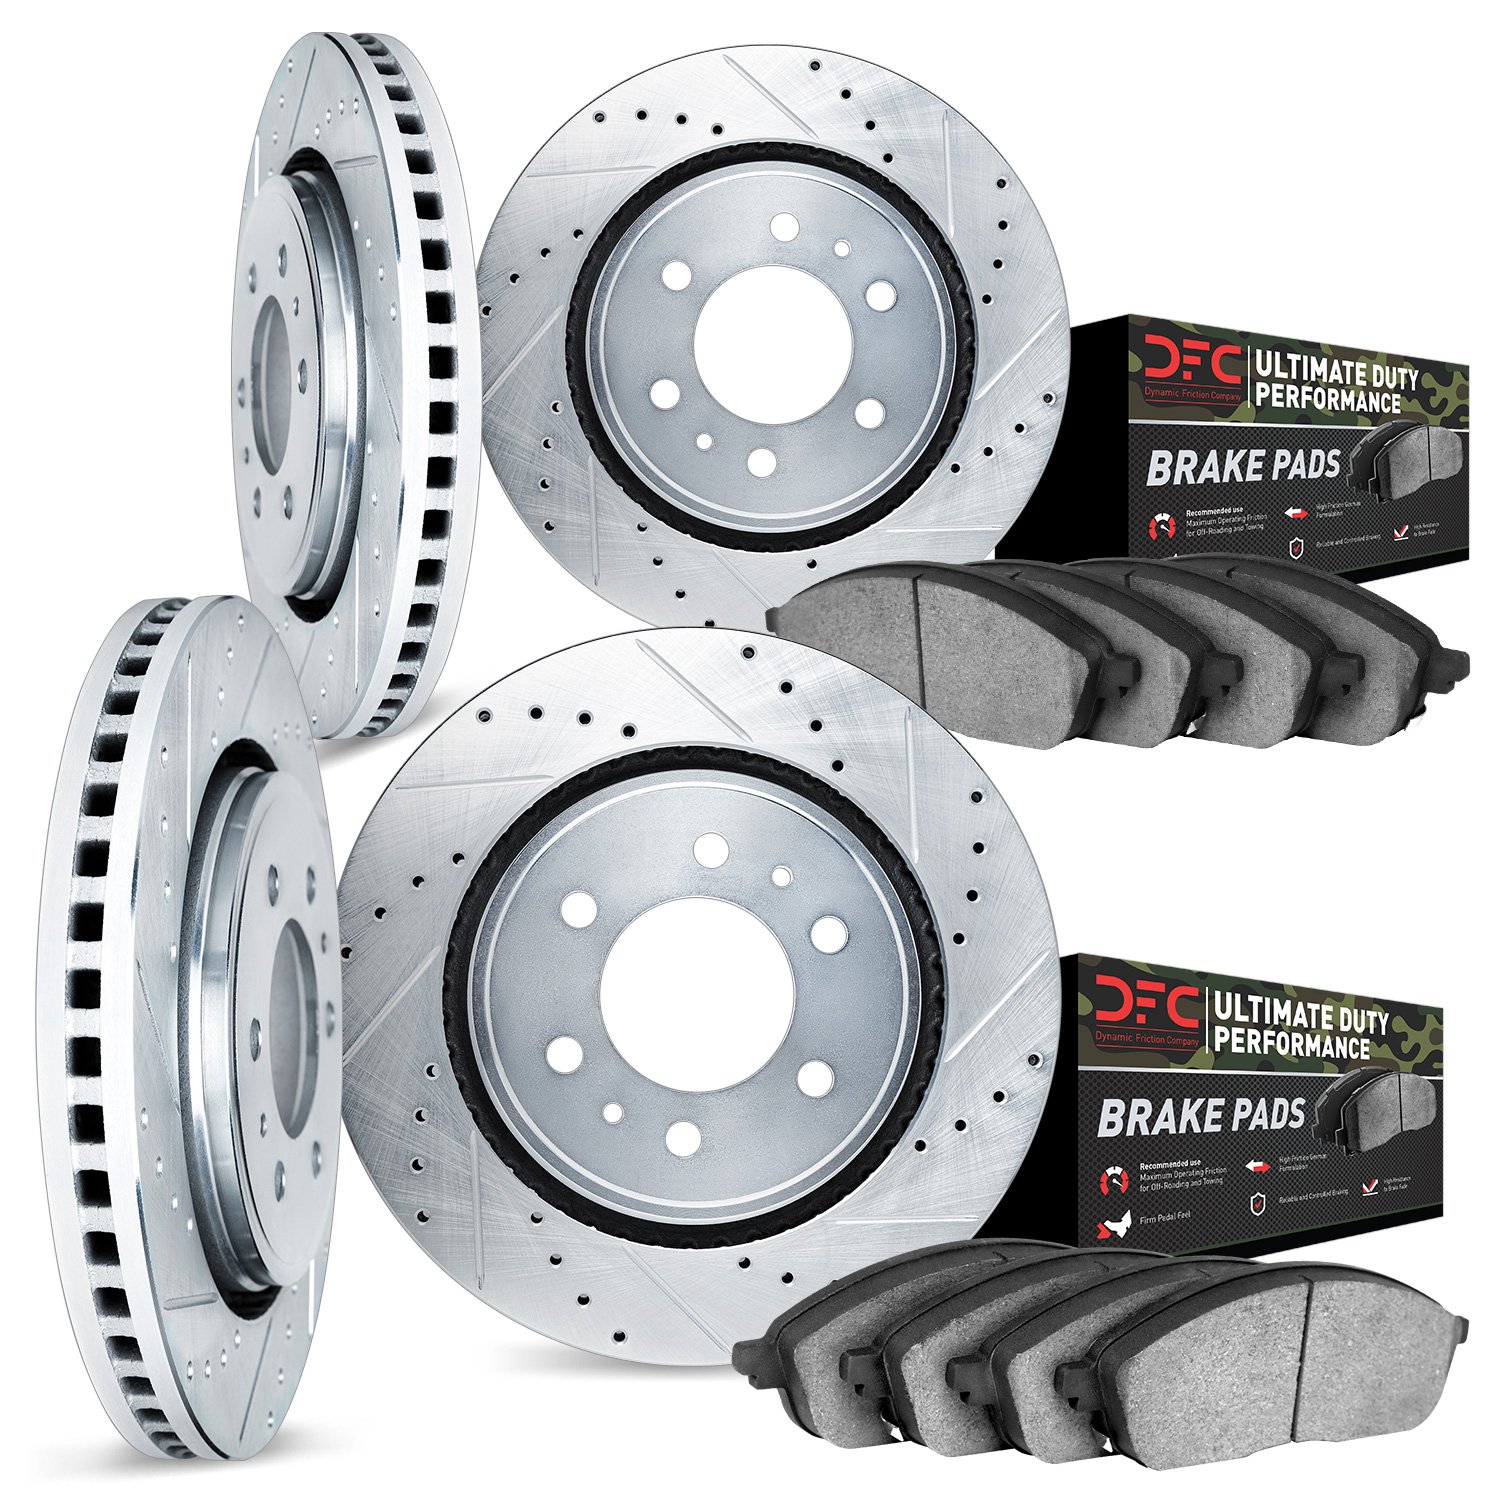 7404-67005 Drilled/Slotted Brake Rotors with Ultimate-Duty Brake Pads Kit [Silver], Fits Select Infiniti/Nissan, Position: Front